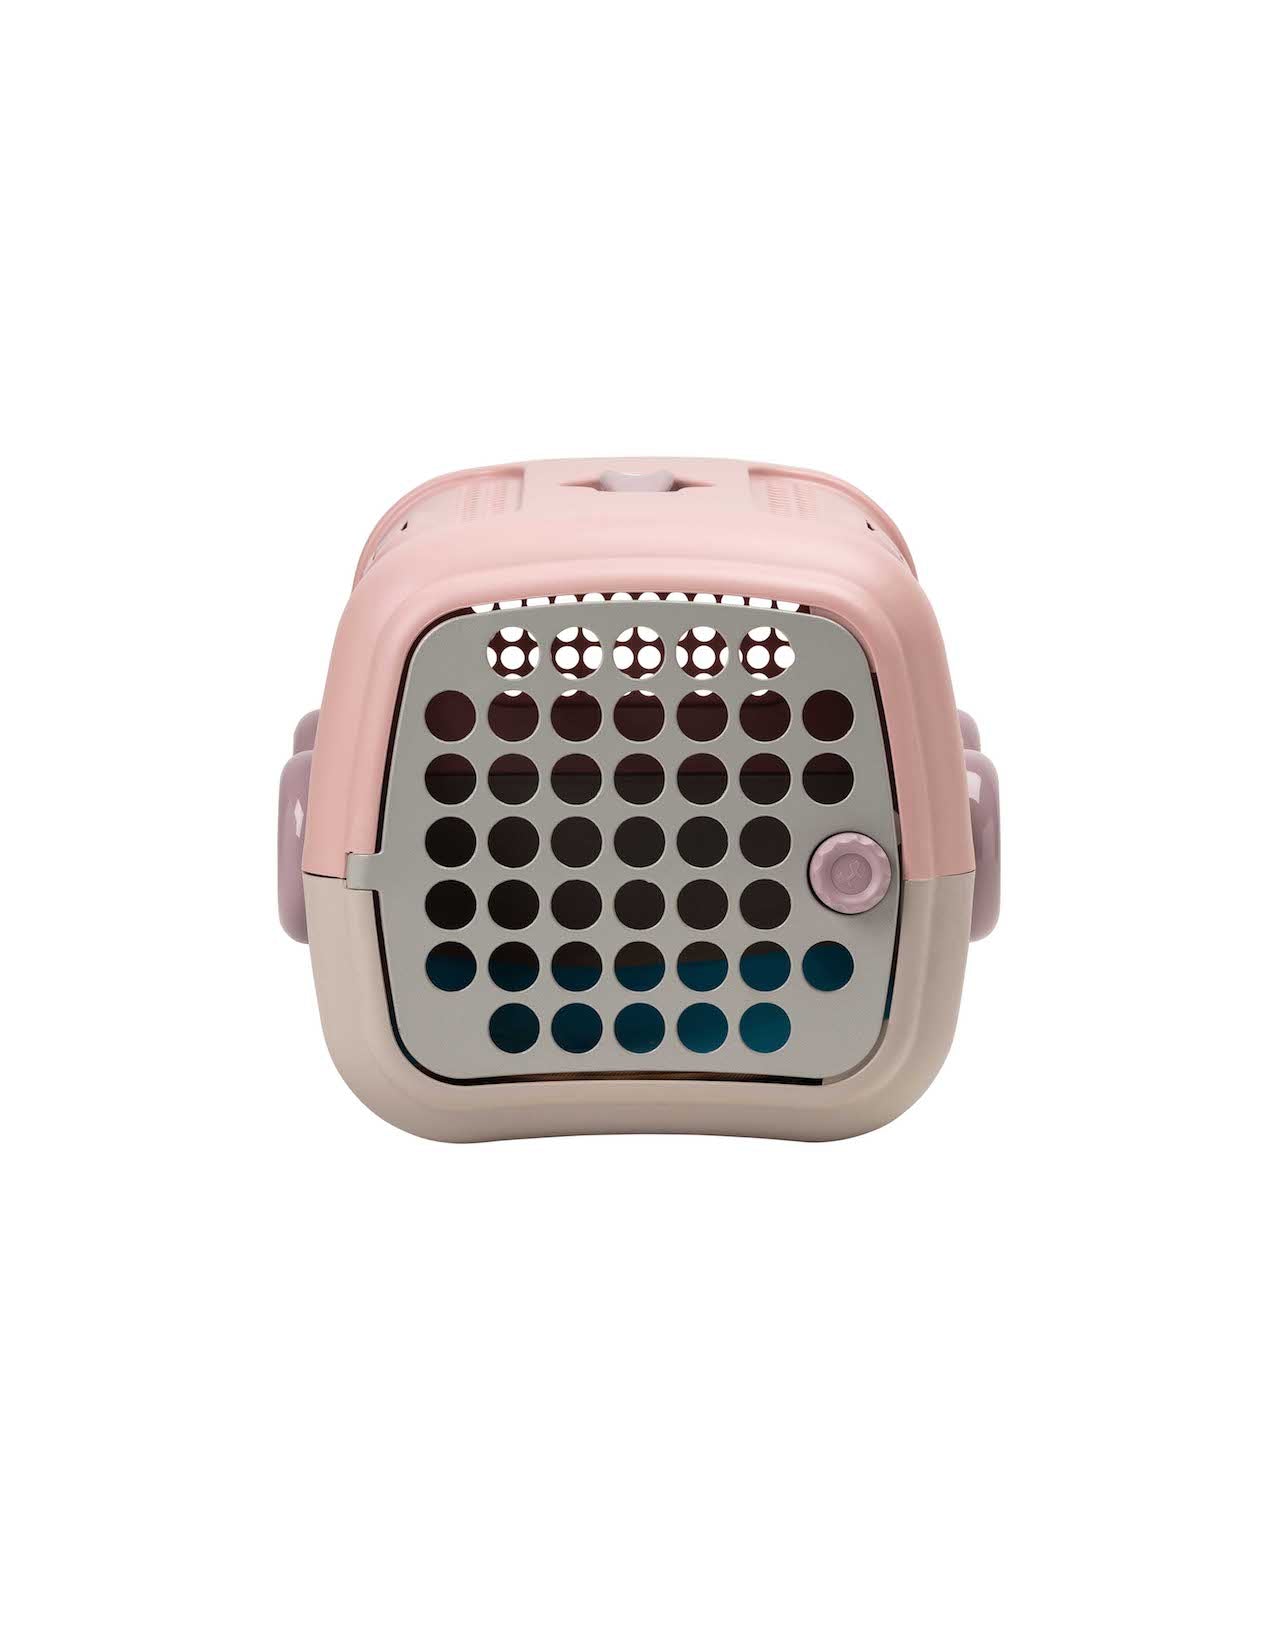 United Pets A.U.T.O. Pink/Taupe Carrier - 0